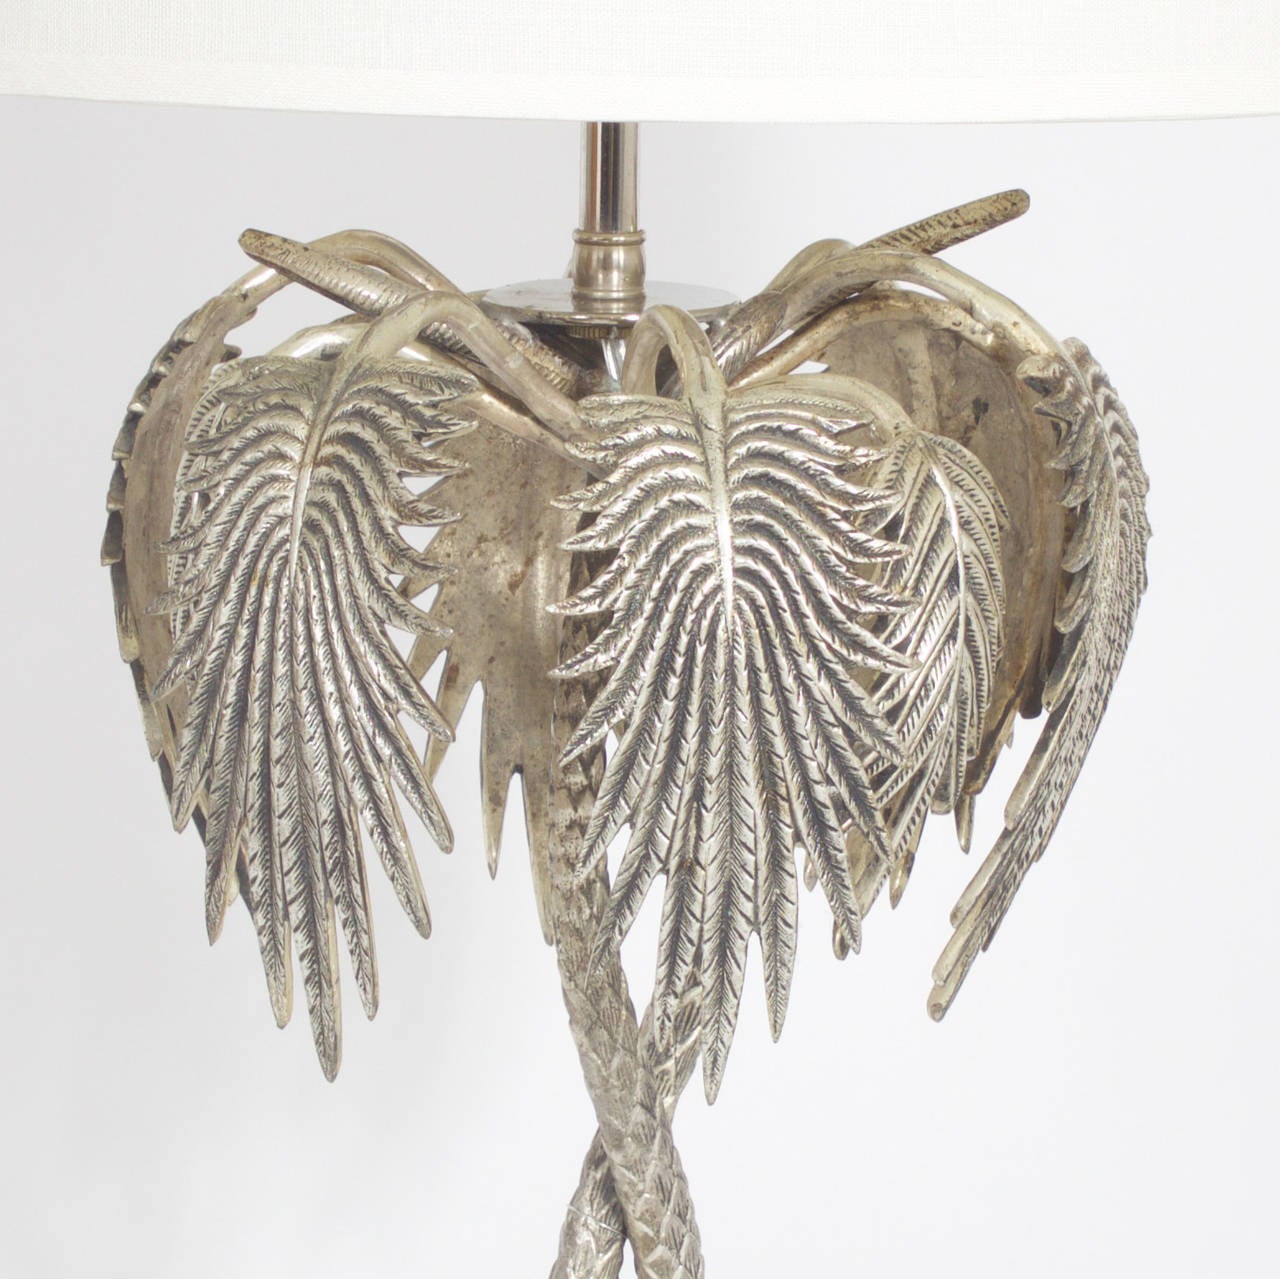 20th Century Pair of Silvered Metal Palm Tree Lamps with Camel and Elephant